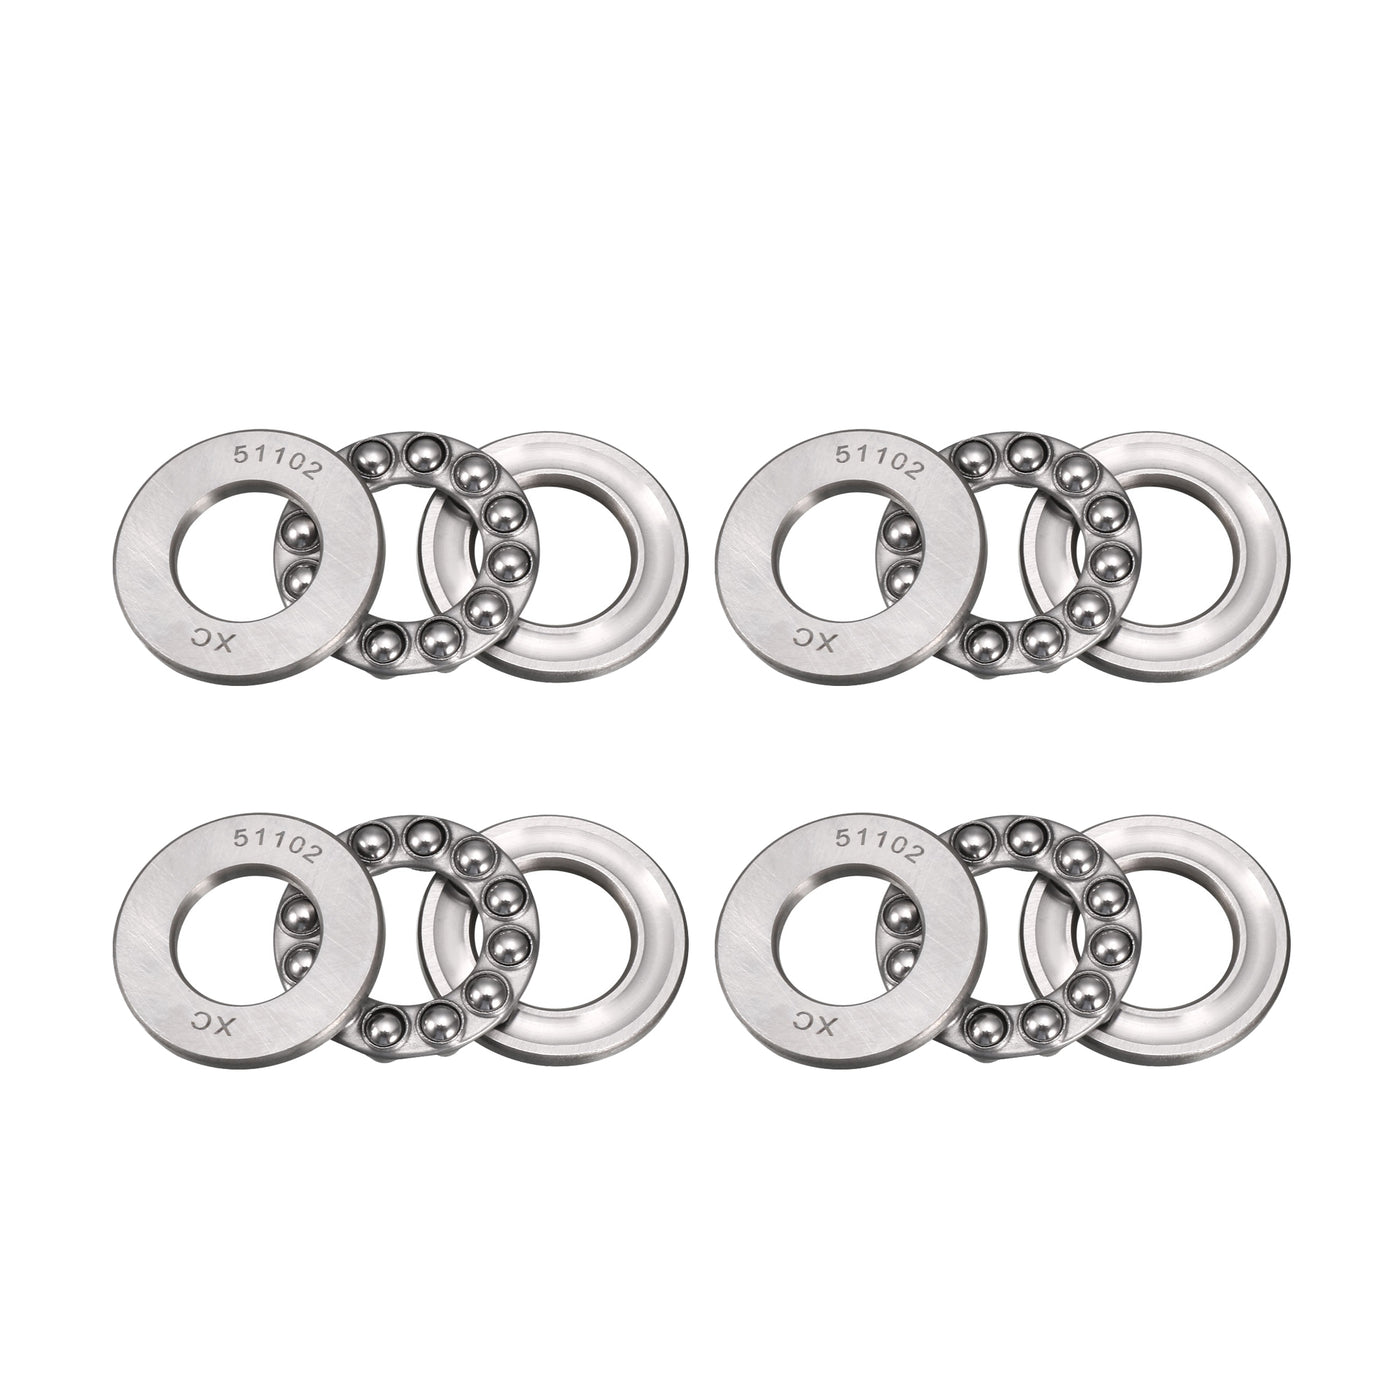 uxcell Uxcell 51102 Miniature Thrust Ball Bearing 15x28x9mm Chrome Steel with Washer 4pcs